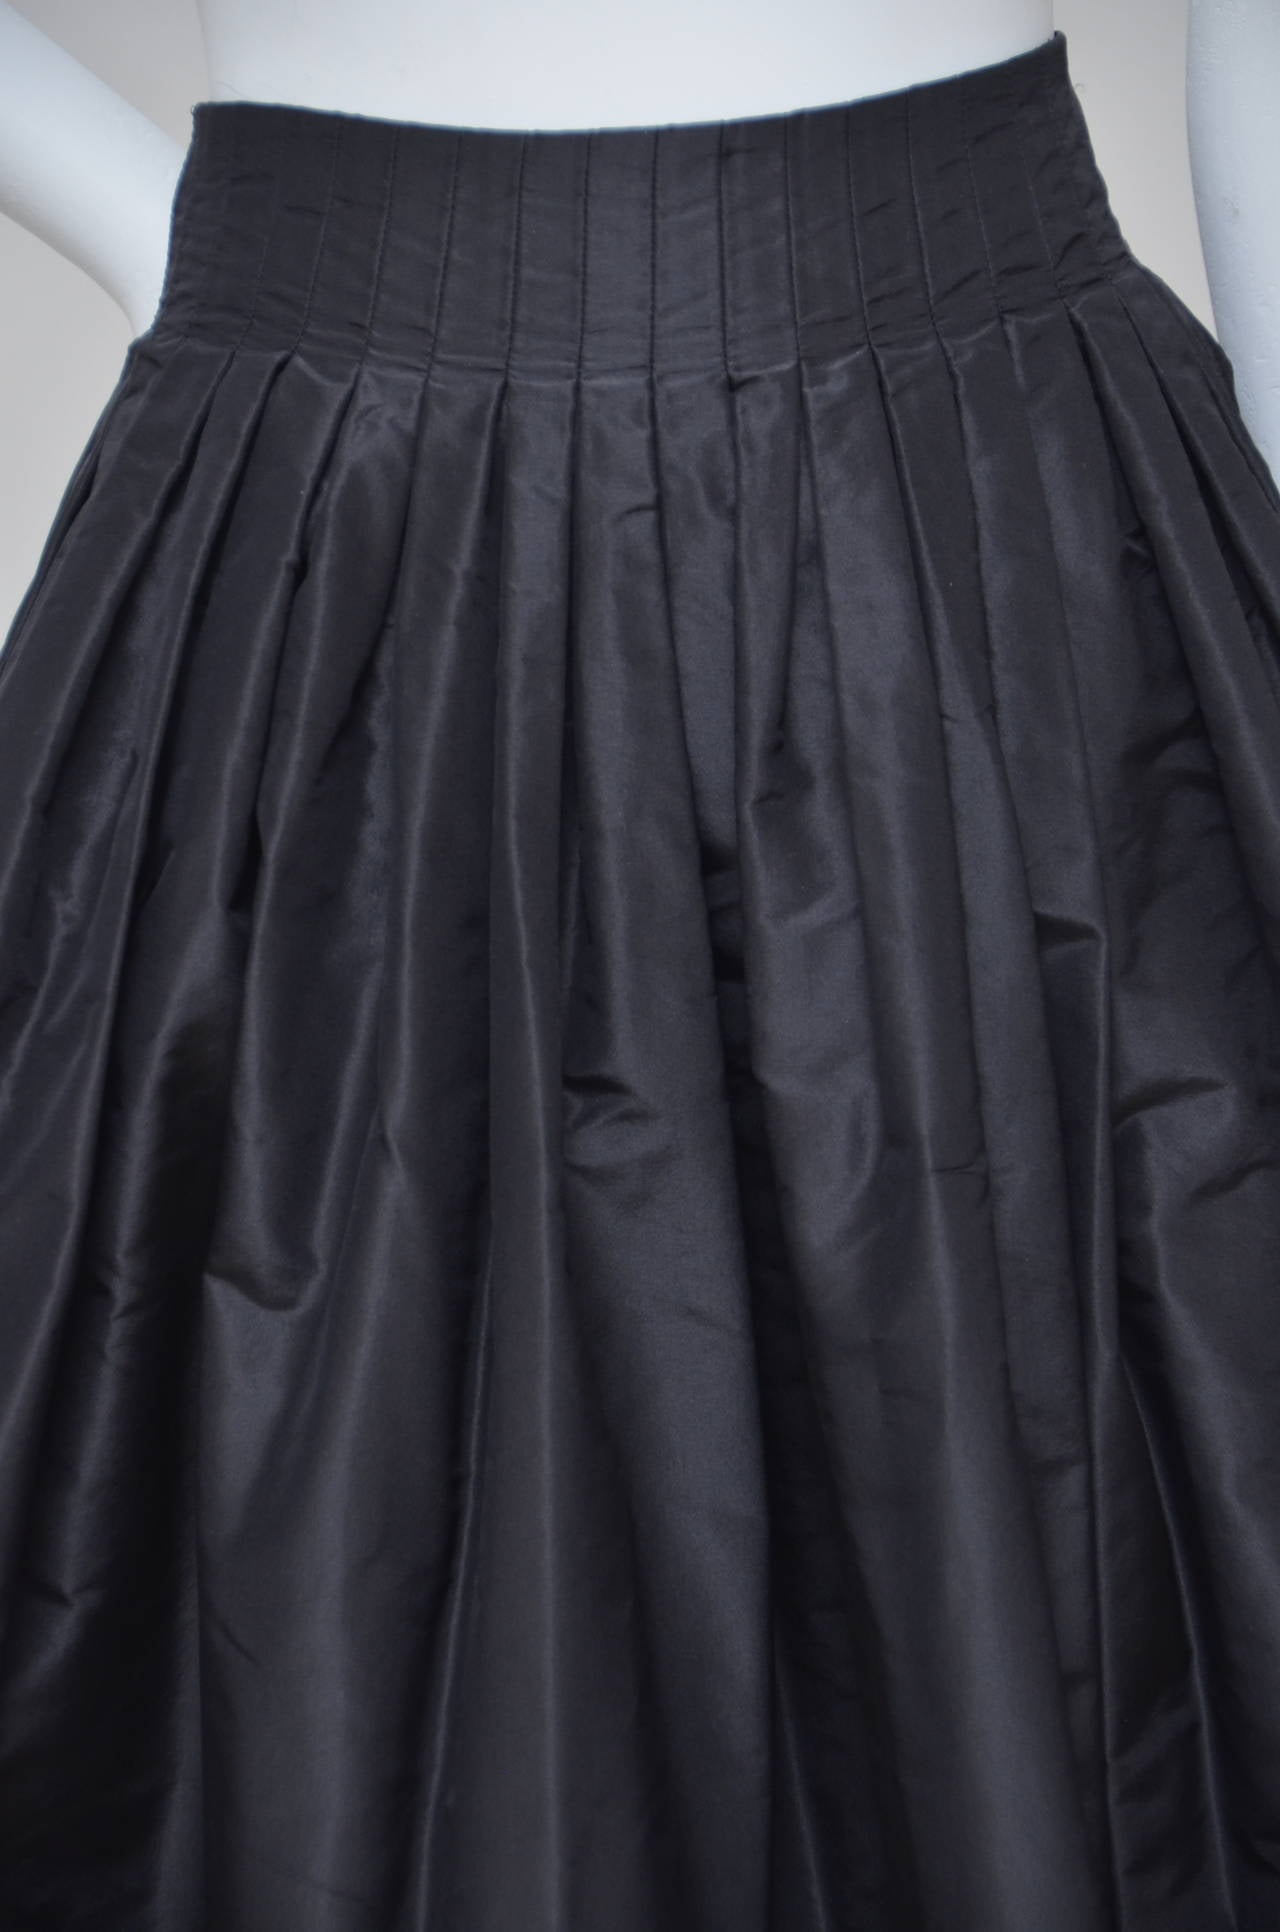 Yves Saint Laurent long silk skirt.

Excellent condition.
Size label missing.
Two pockets on the sides.
Skirt measure:waist 13